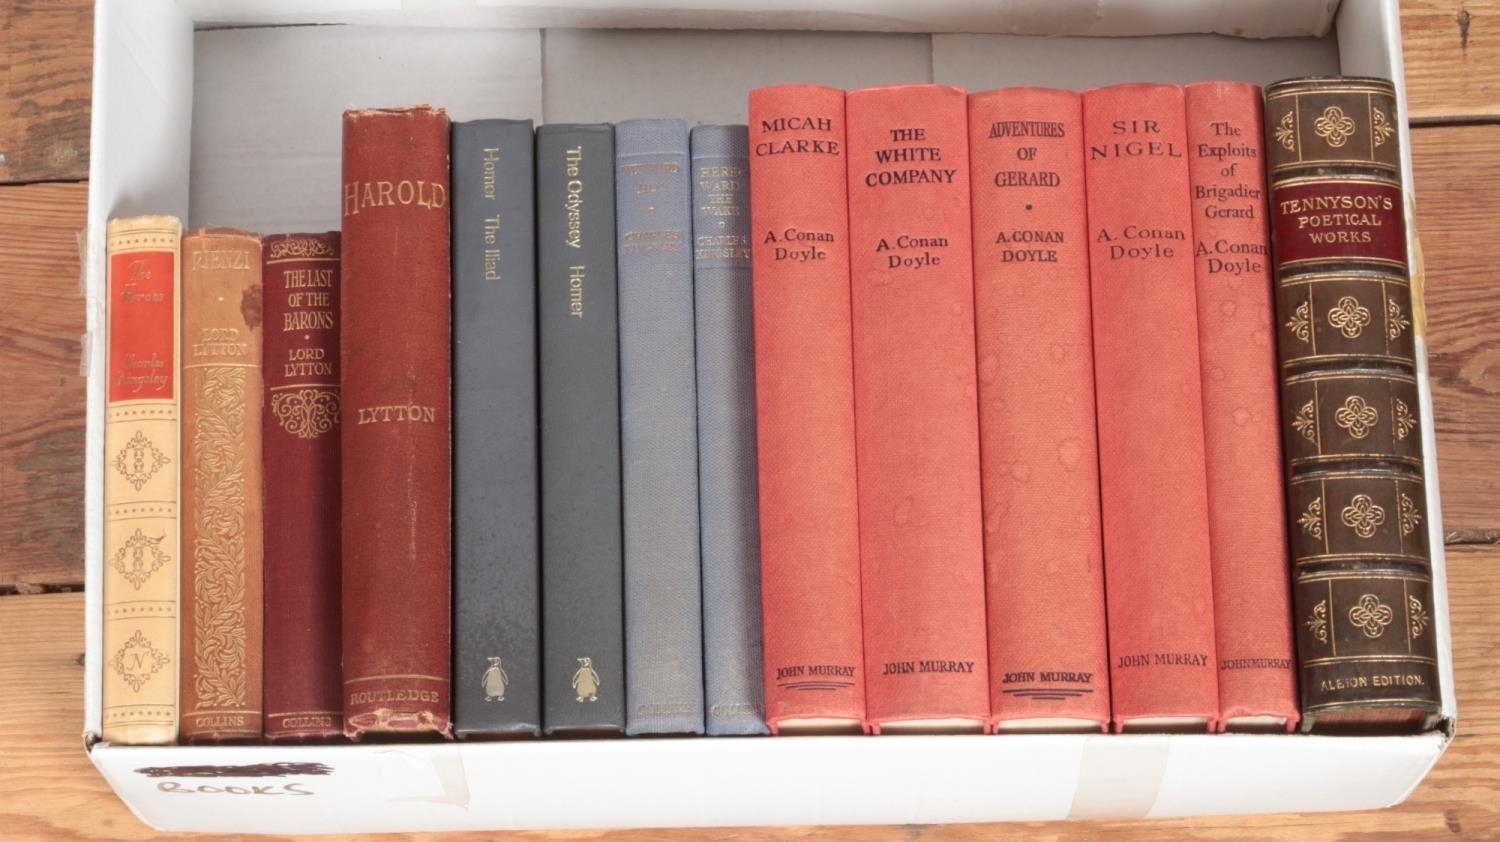 A box of vintage and antique books. Includes Poetical Works of Alfred Lord Tennyson, Albion Edition,